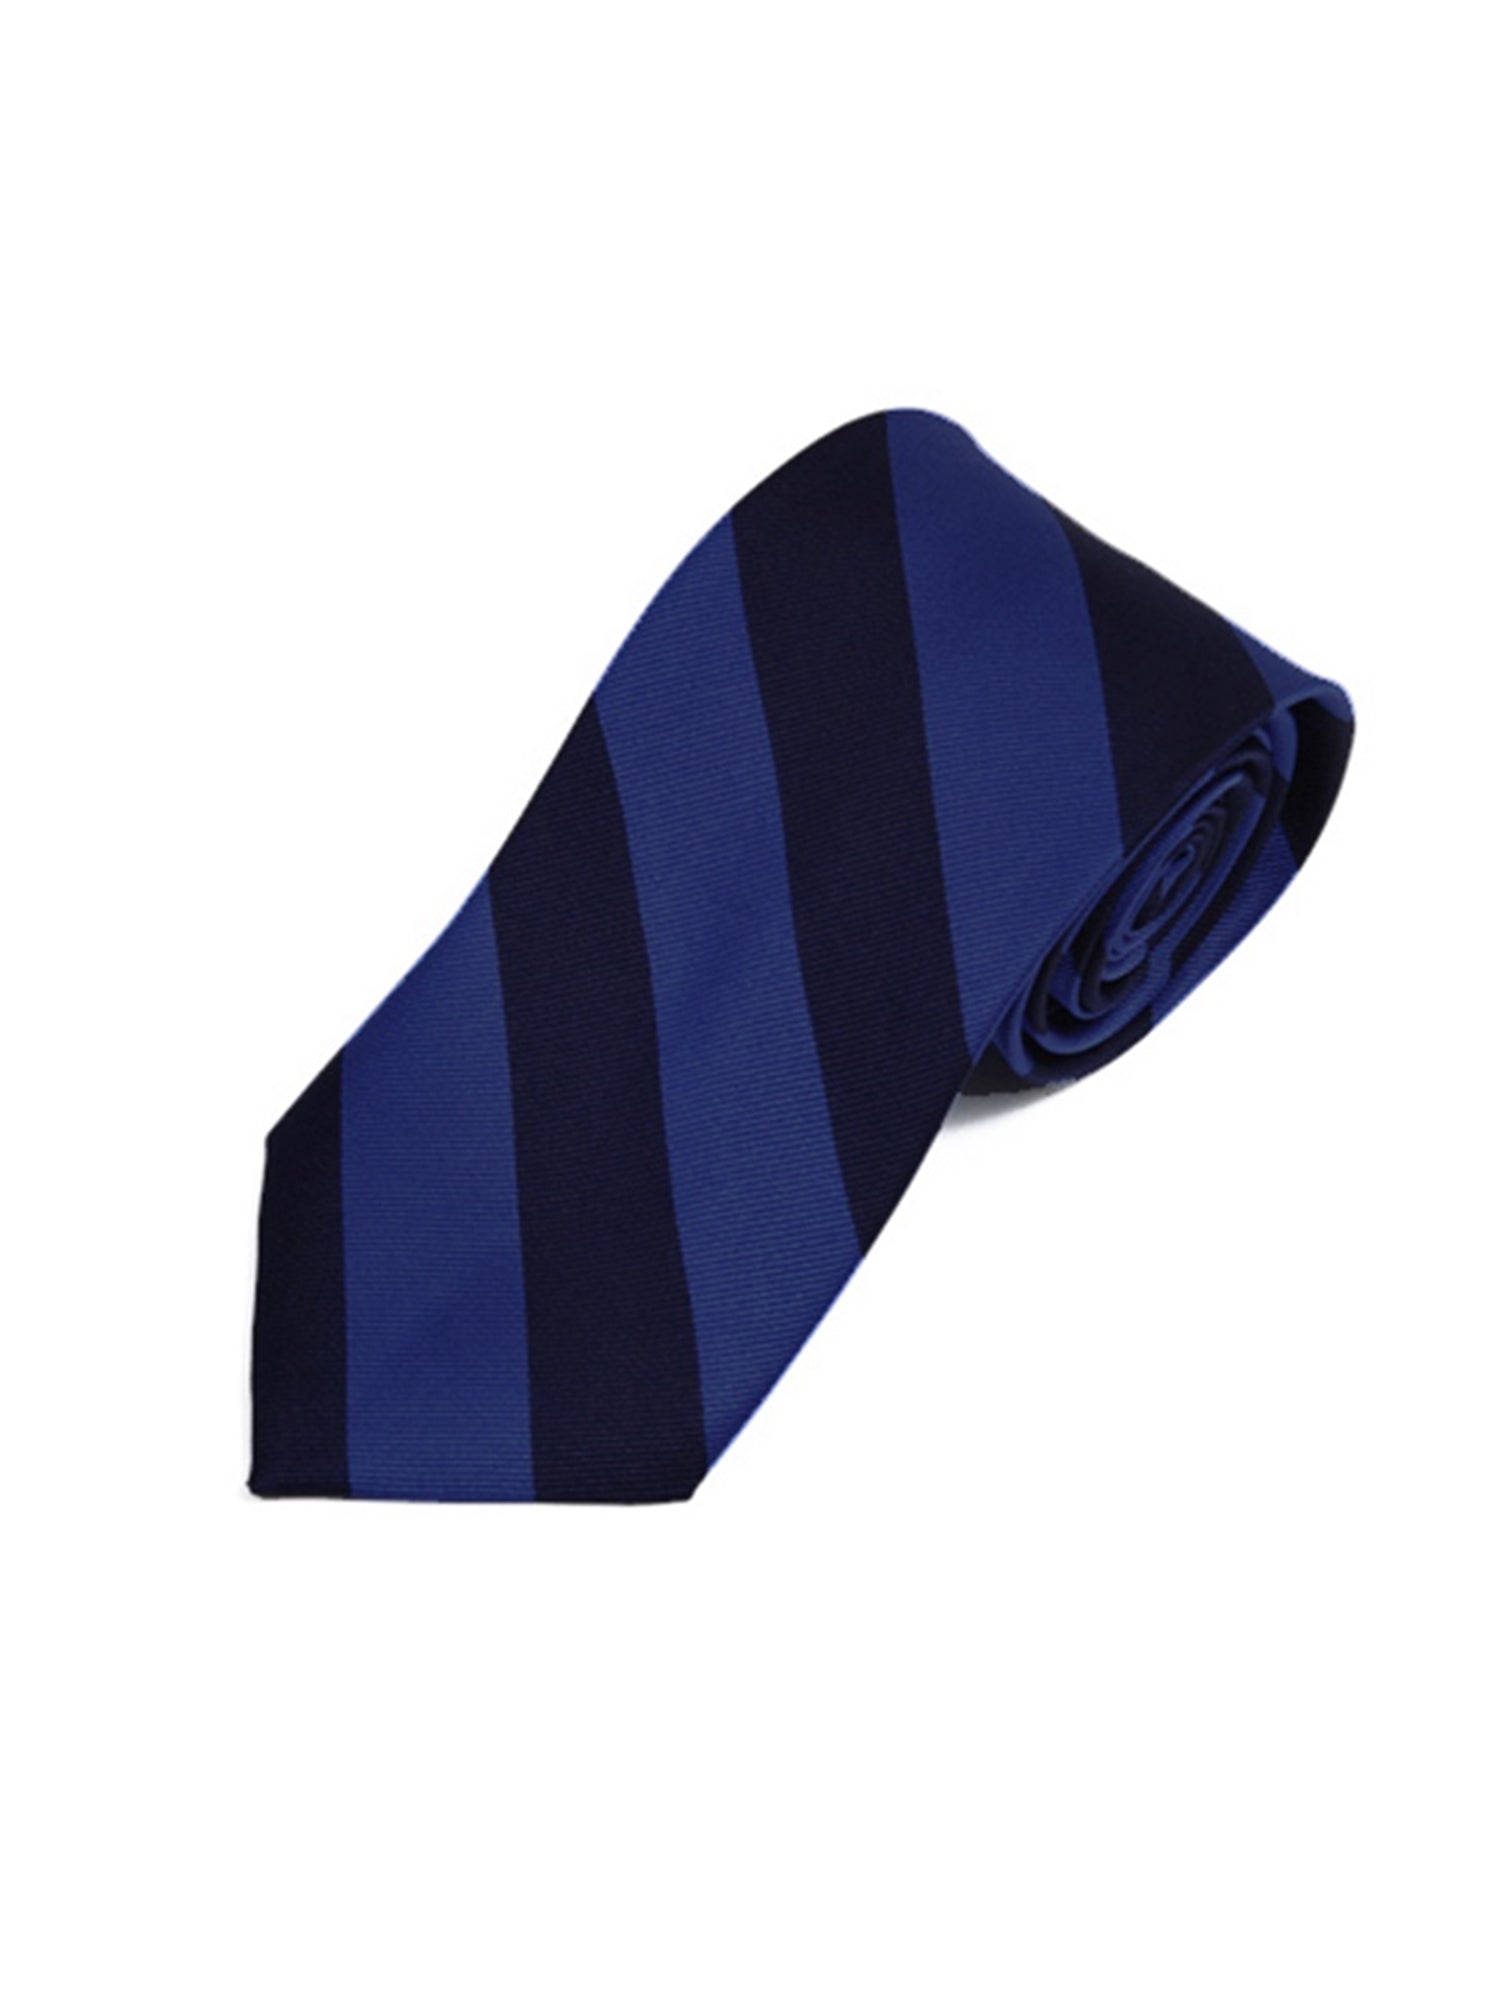 Men's College Striped Colored Silk Long Or X-Long Neck Tie Neck Tie TheDapperTie Blue & Navy 57" long & 3.25" wide 